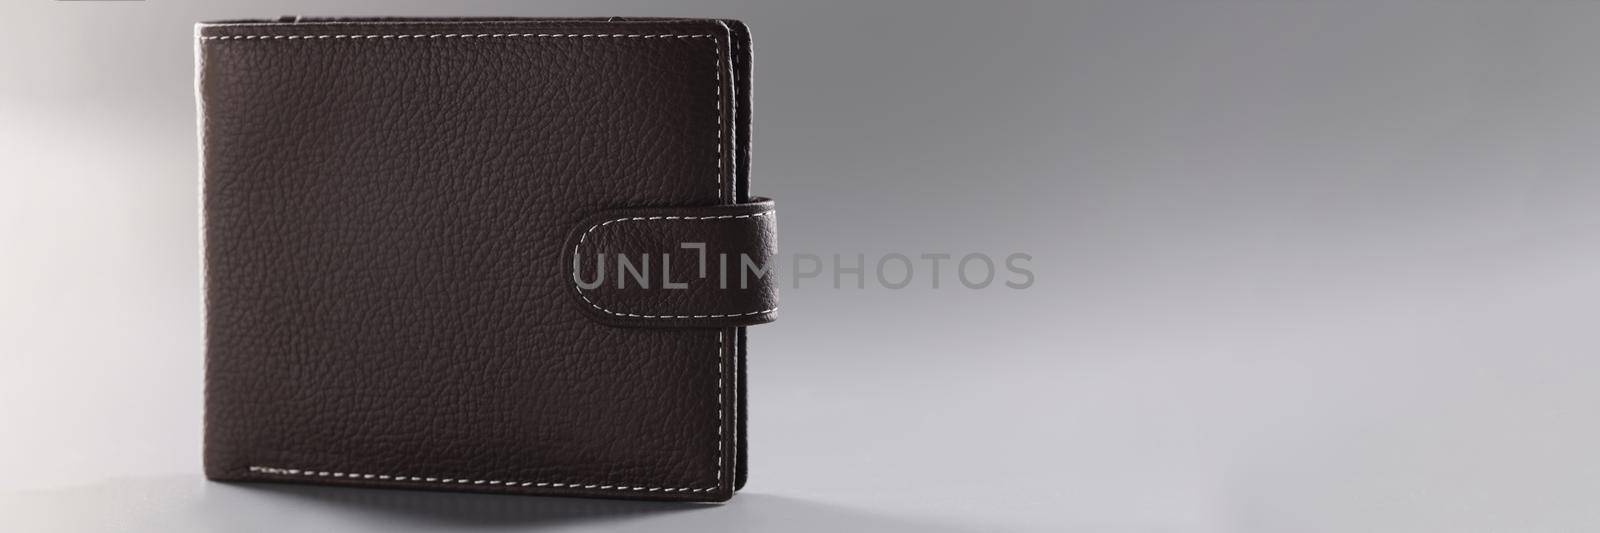 Close-up of brown genuine leather wallet with banknotes and credit card inside. Stylish minimal mens purse. Fashion, style, accessory concept. Copy space